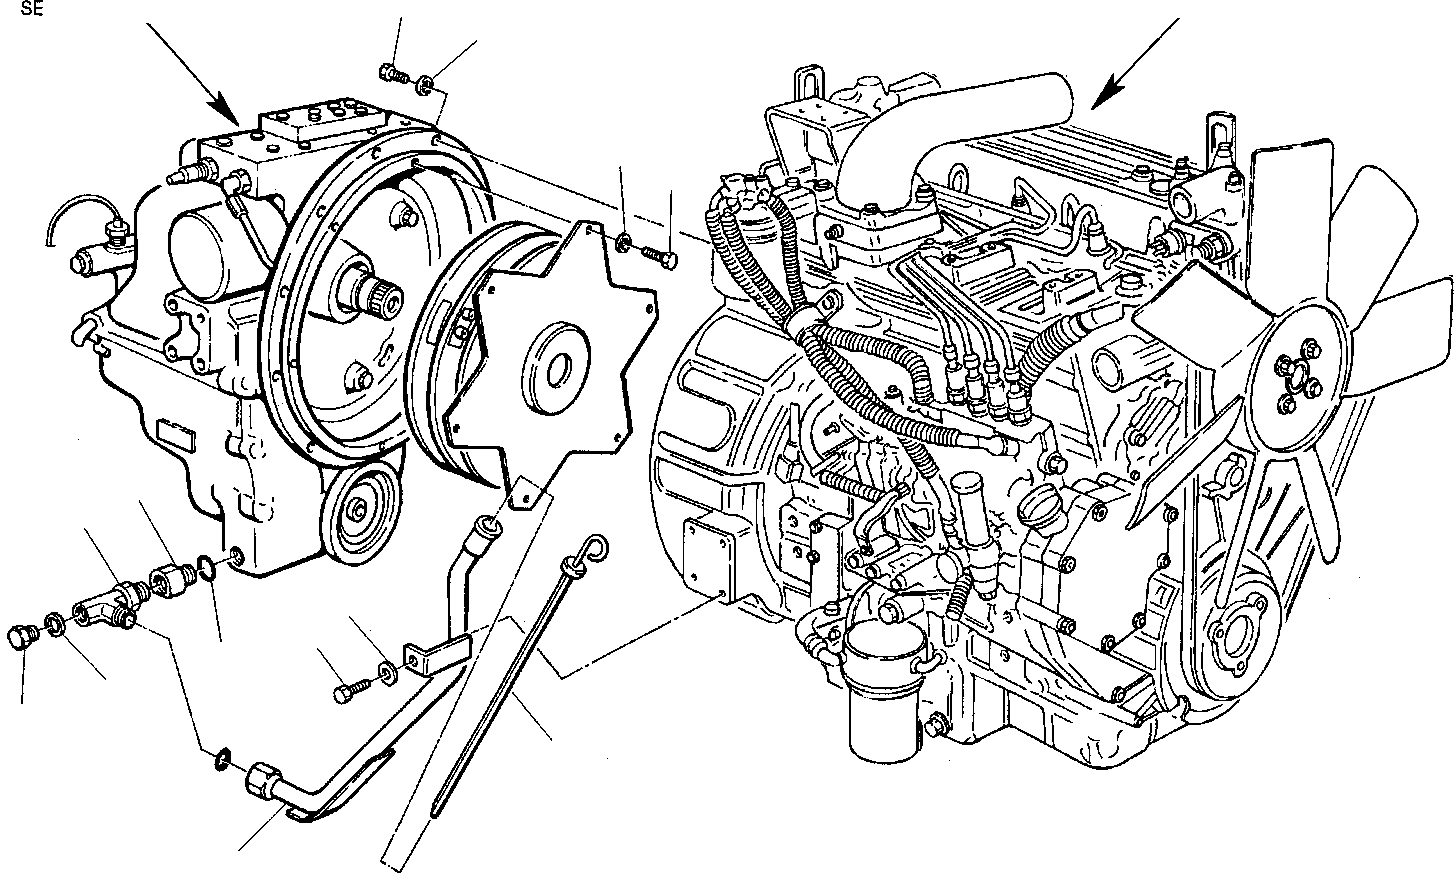 Part 2. ENGINE AND DRIVE CONNECTION [1010]